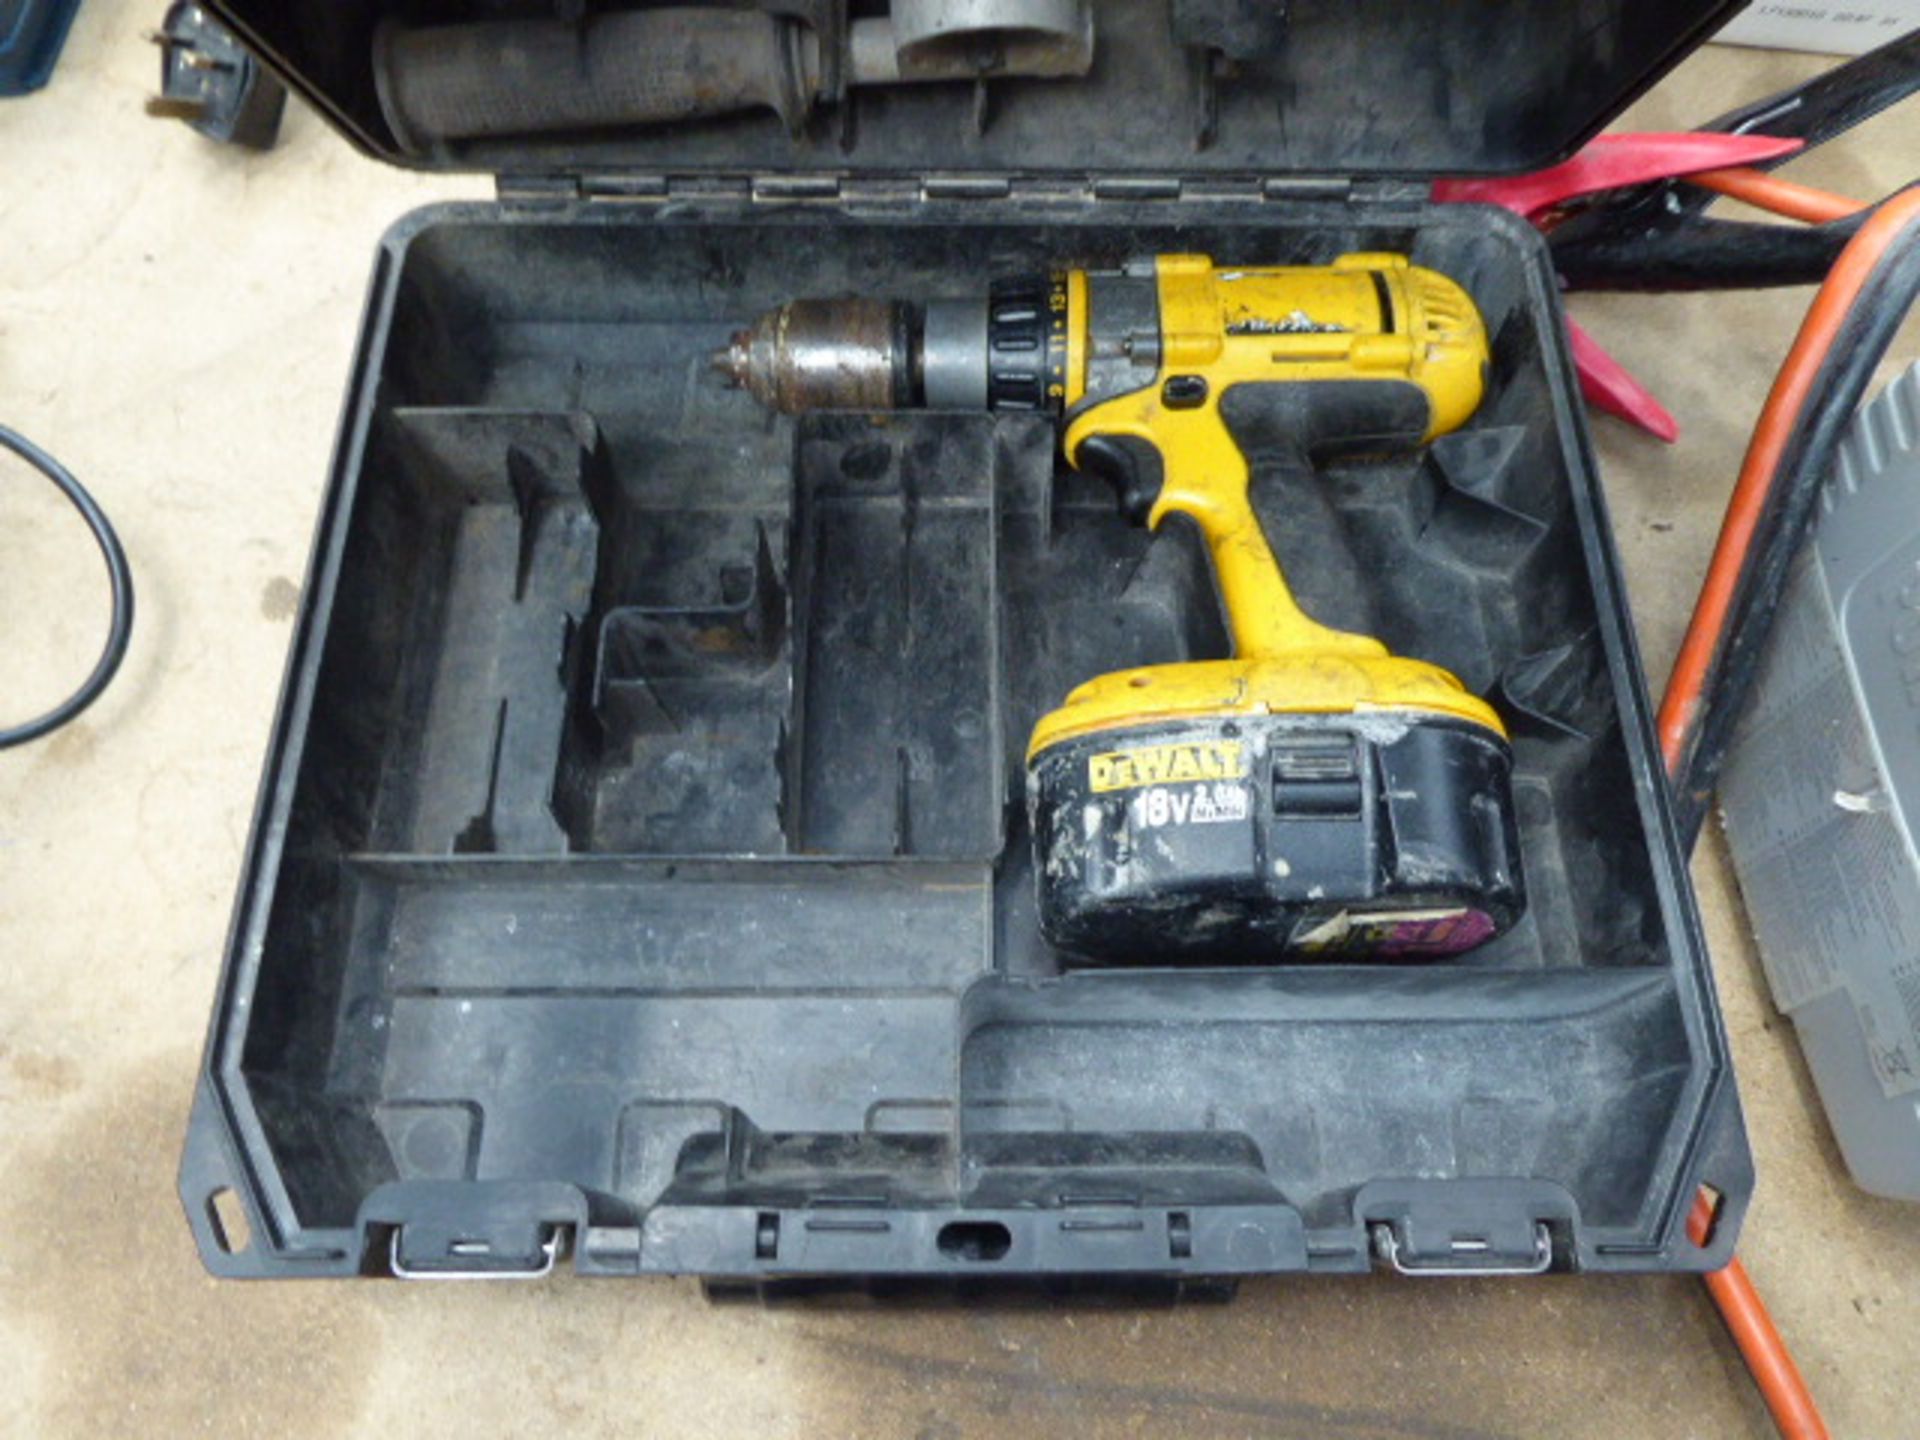 Dewalt 18v cordless drill with 1 battery/ no charger